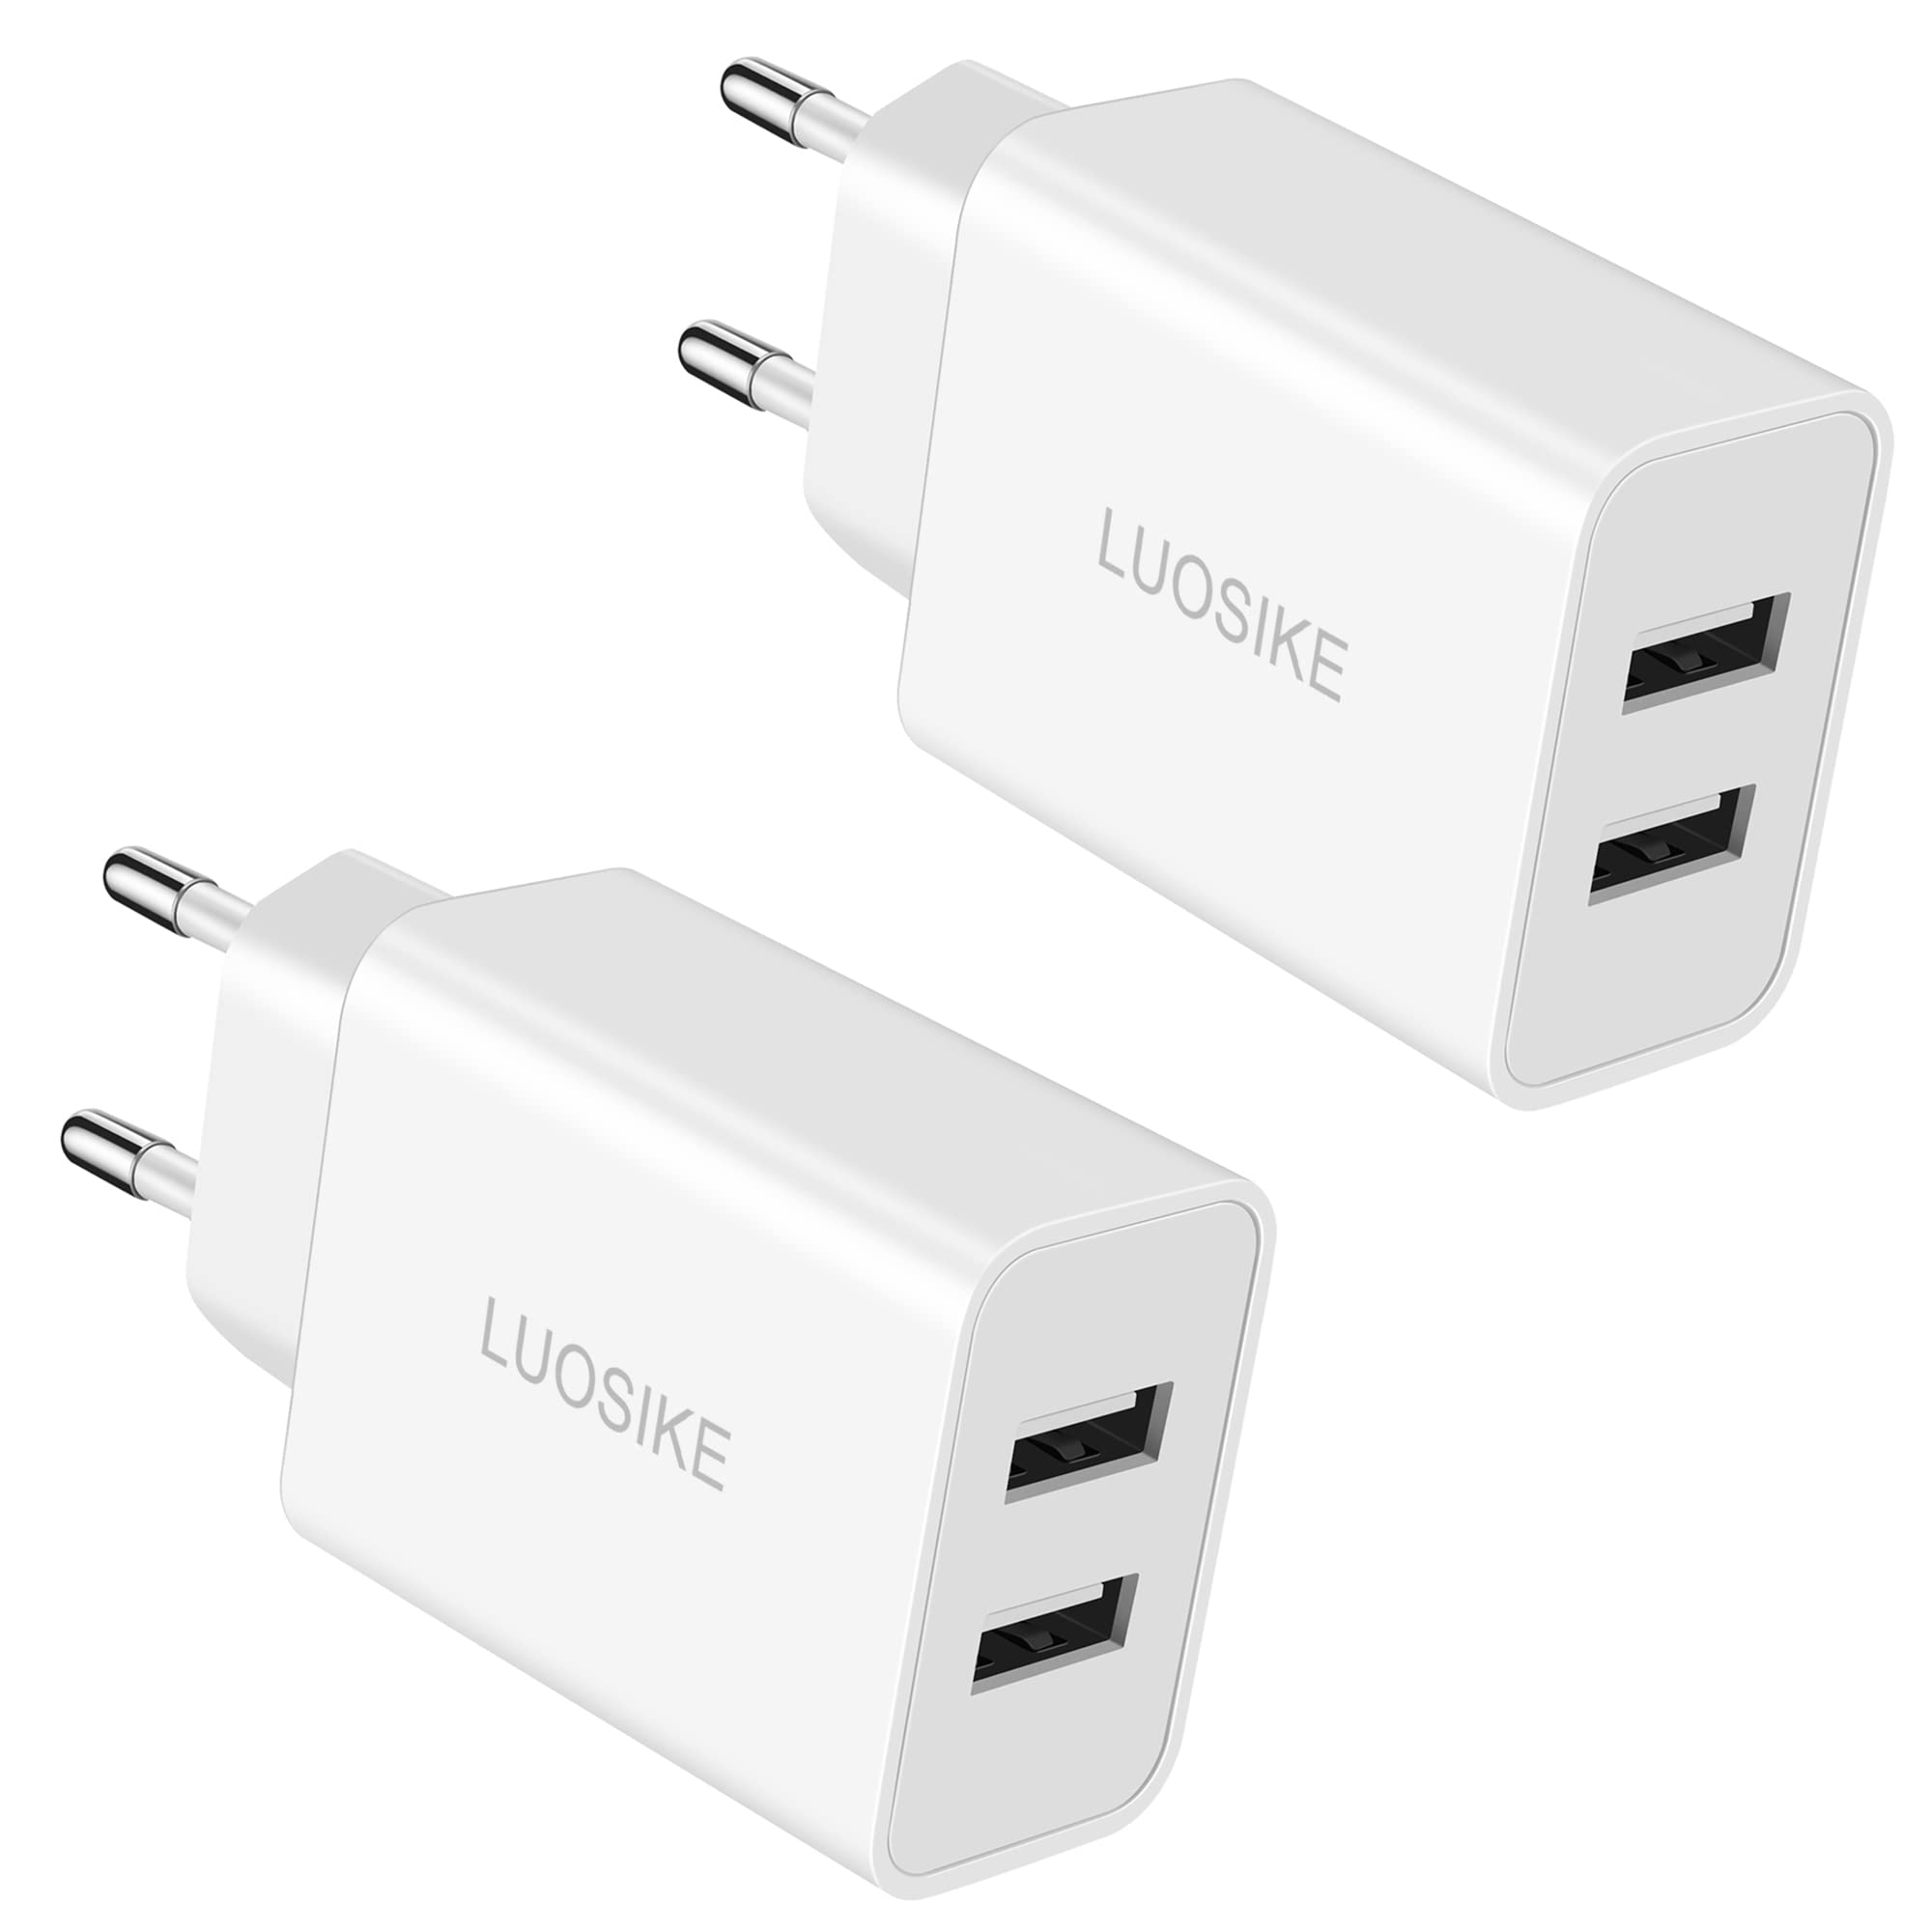 European Travel Plug Adapter, LUOSIKE 2.1A Dual USB Wall Charger Travel Power Adapter International Canada to Europe EU Charging Block for iPhone 13 12 11 XR XS X 8 7 6, iPad, Samsung, Android